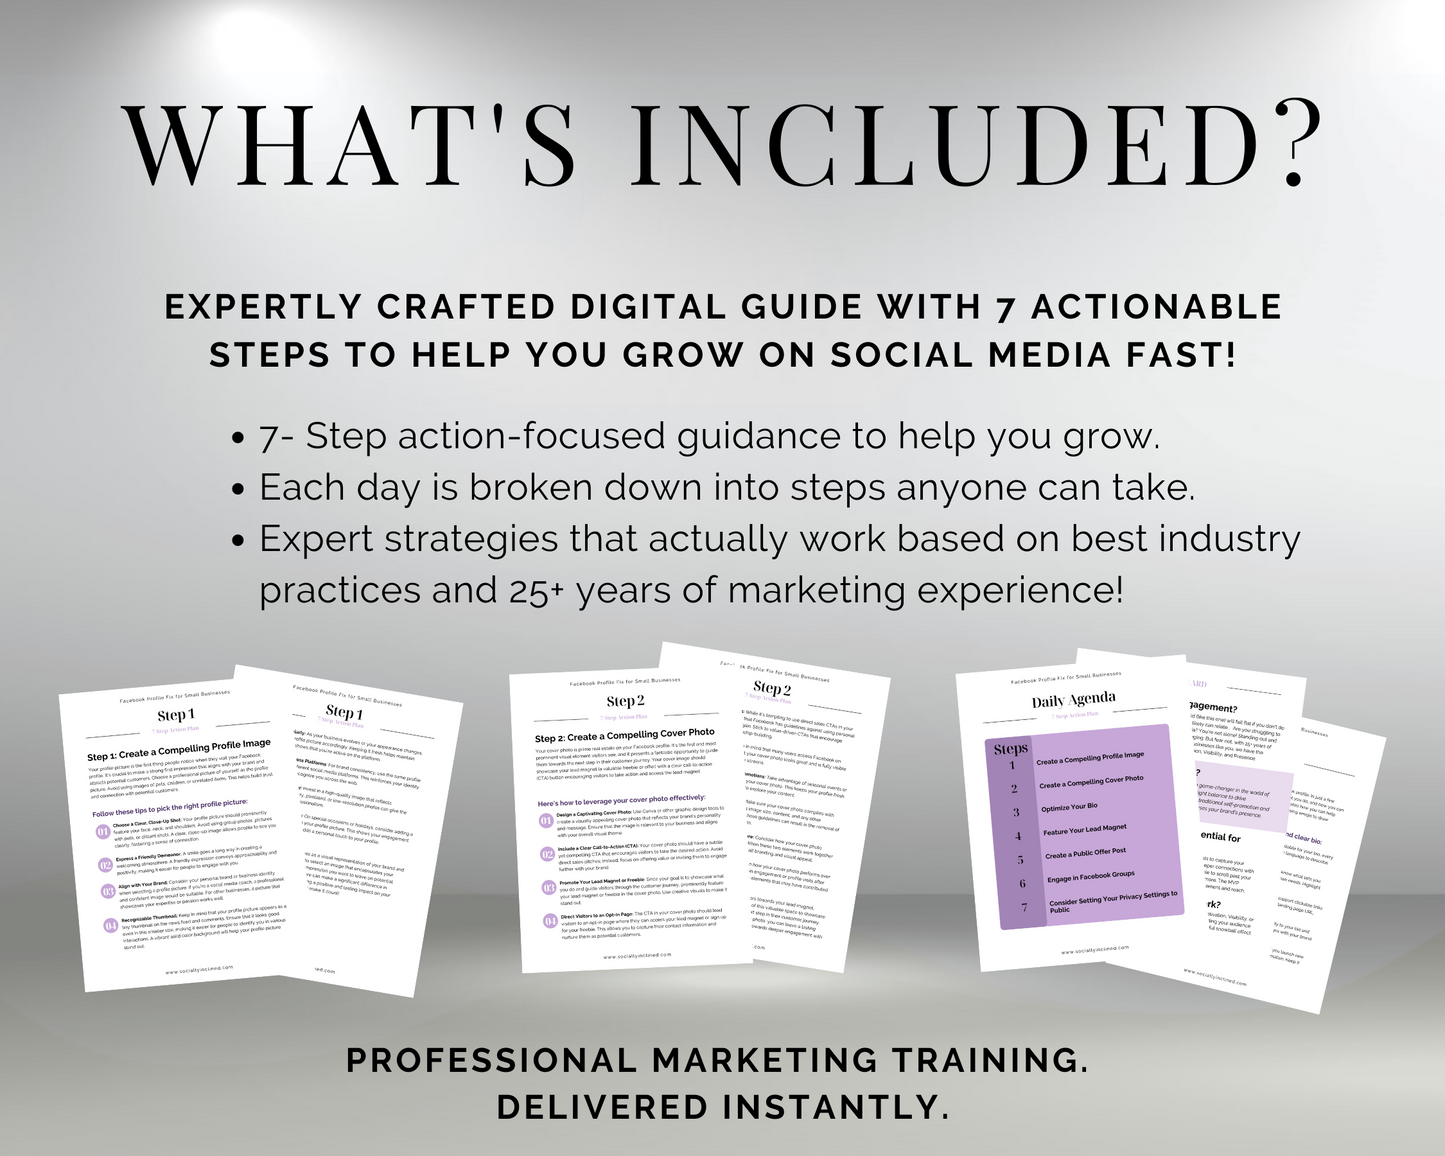 Find out what's included in the digital marketing guide, including the Facebook Profile Fix 7-Day Action Plan by Get Socially Inclined to optimize your Facebook profile.